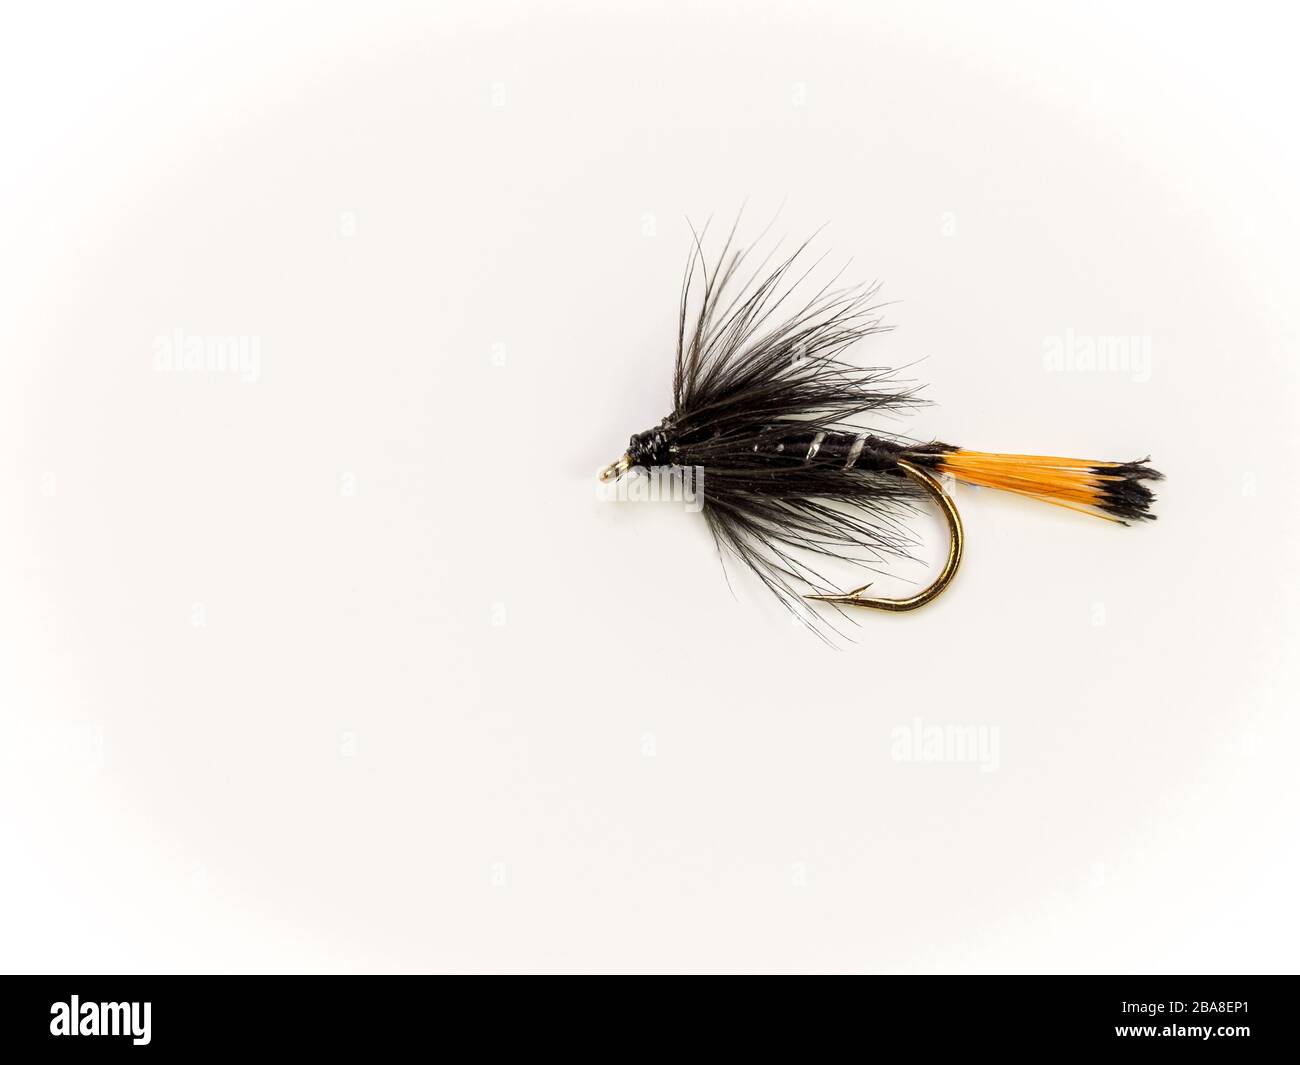 https://c8.alamy.com/comp/2BA8EP1/traditional-wet-fly-fishing-fly-for-trout-black-pennel-2BA8EP1.jpg